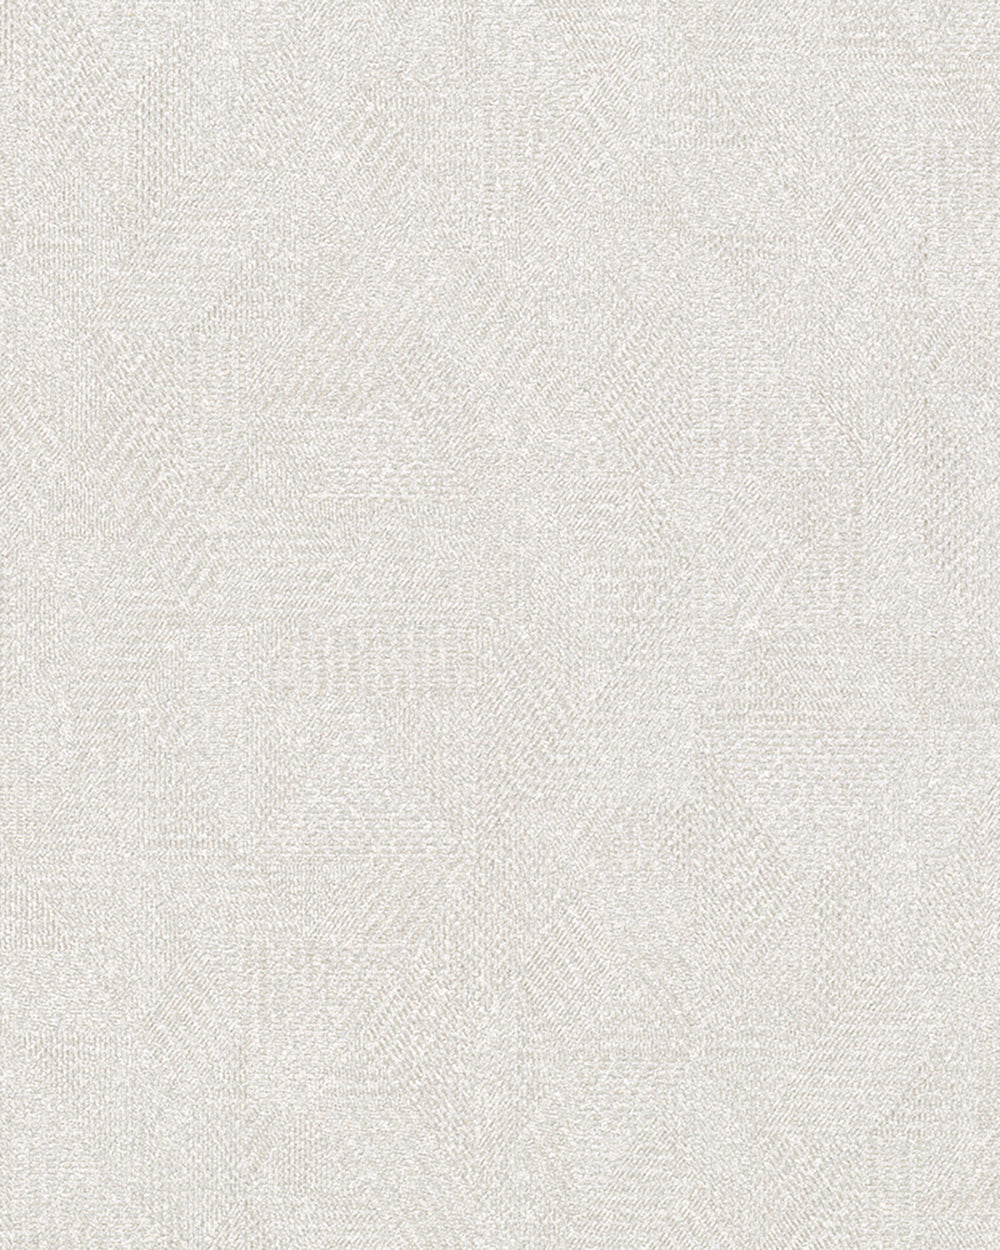 Avalon - Textured Cross Hatched Geo bold wallpaper Marburg Roll Light Taupe  31620